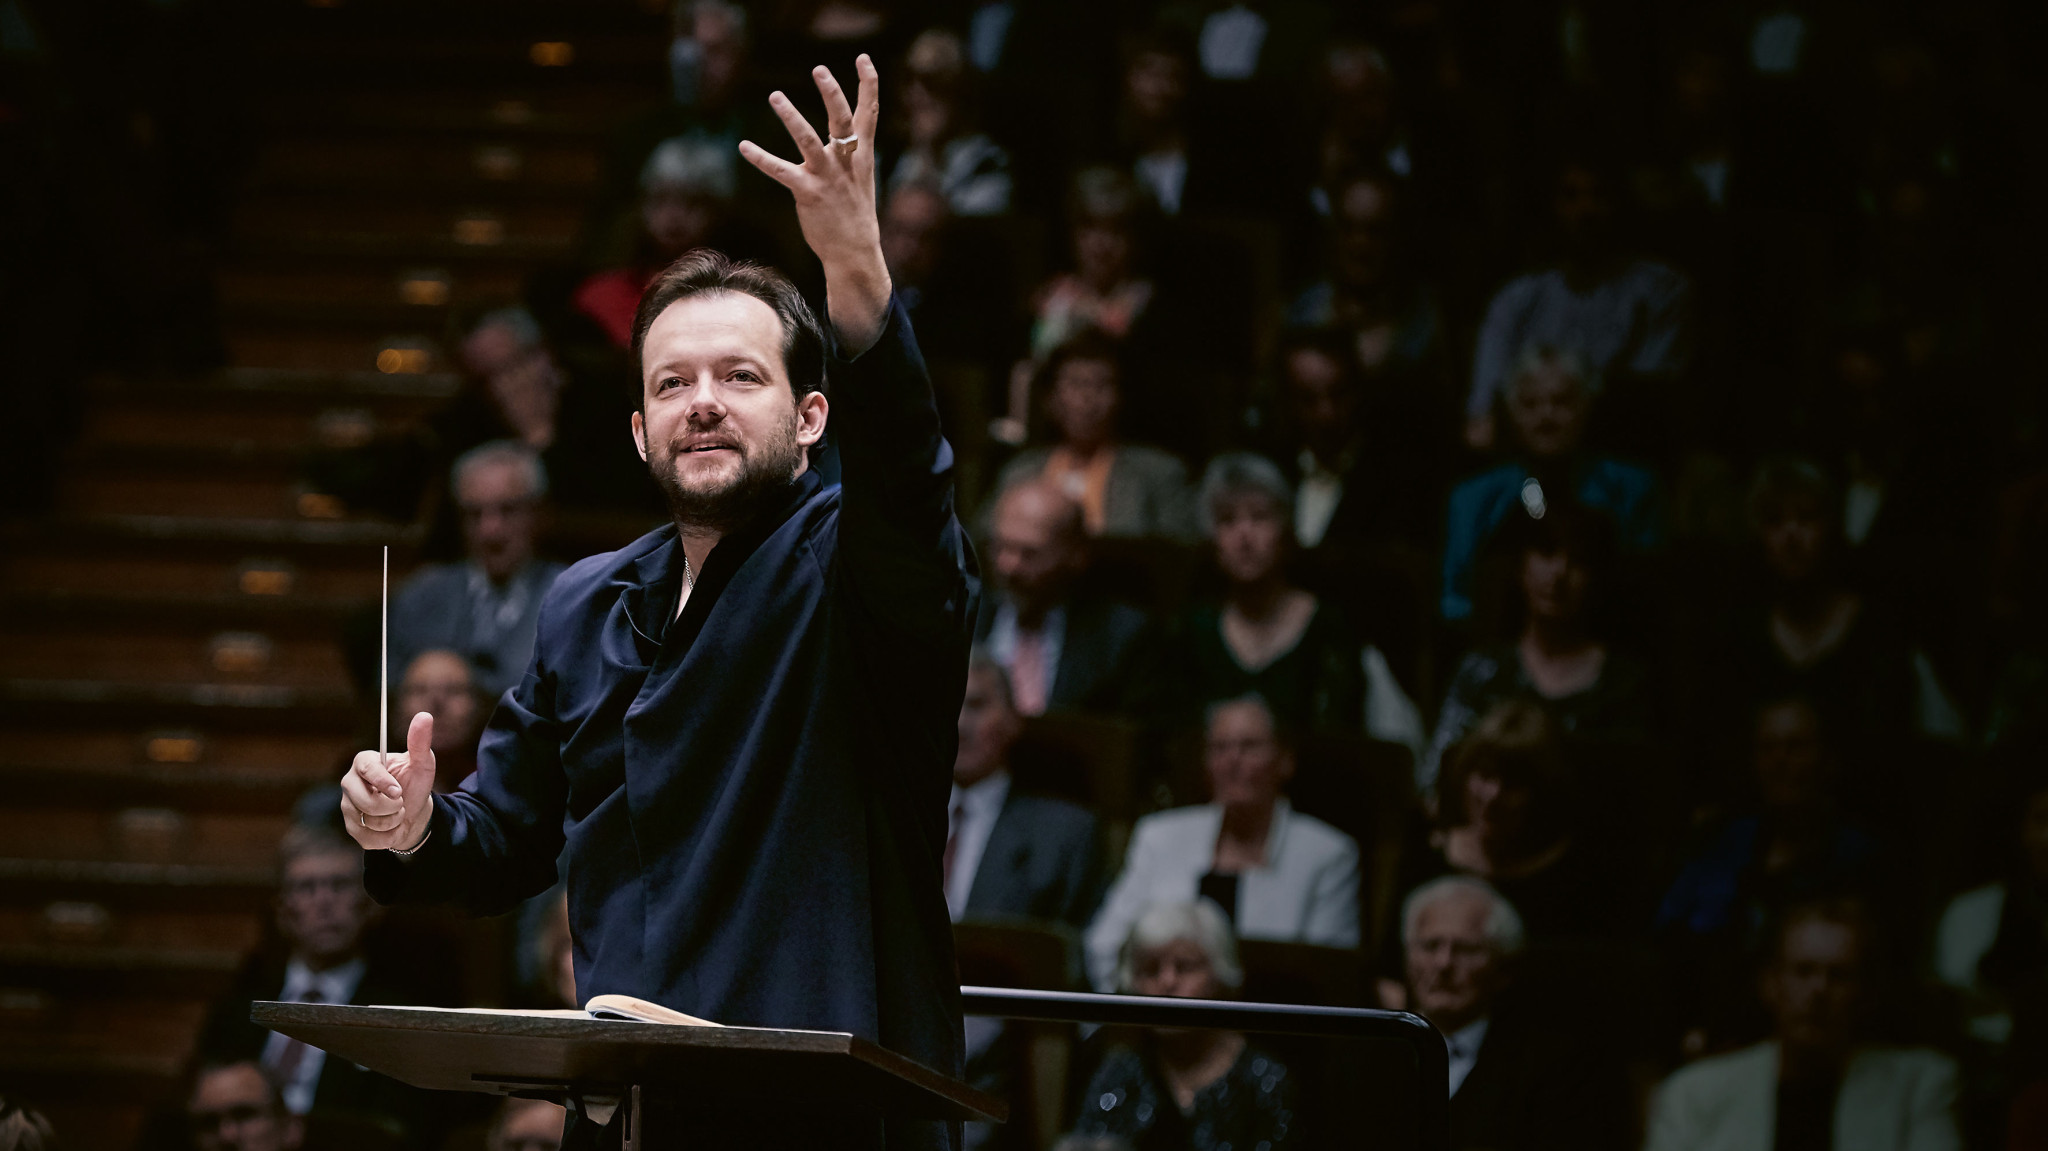 Andris Nelsons and the Gewandhausorchester Leipzig continue their acclaimed Bruckner cycle